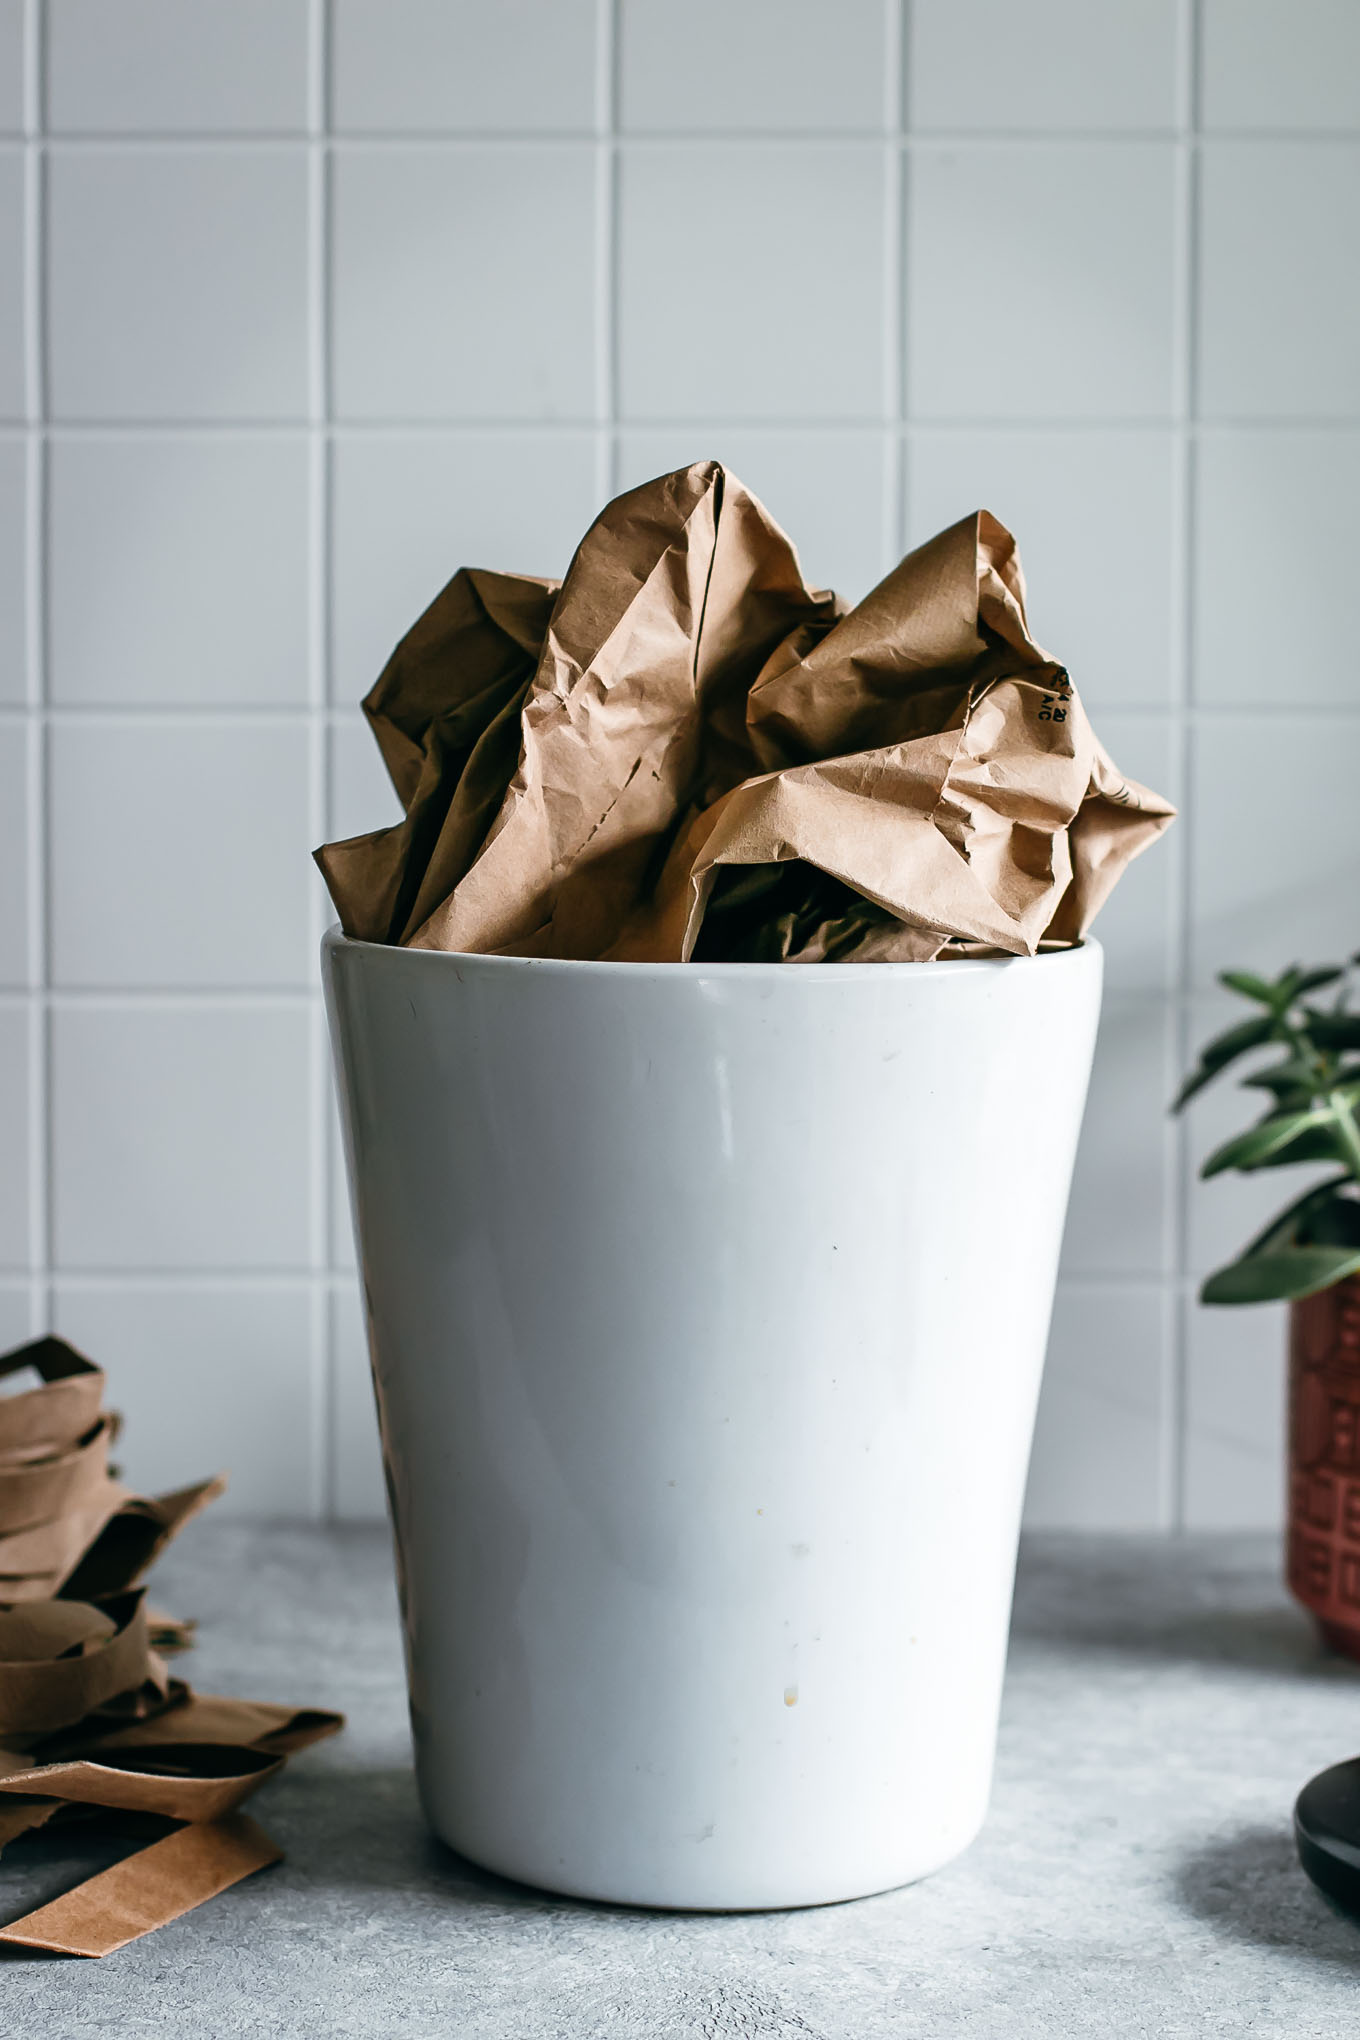 Can paper bags be composted?